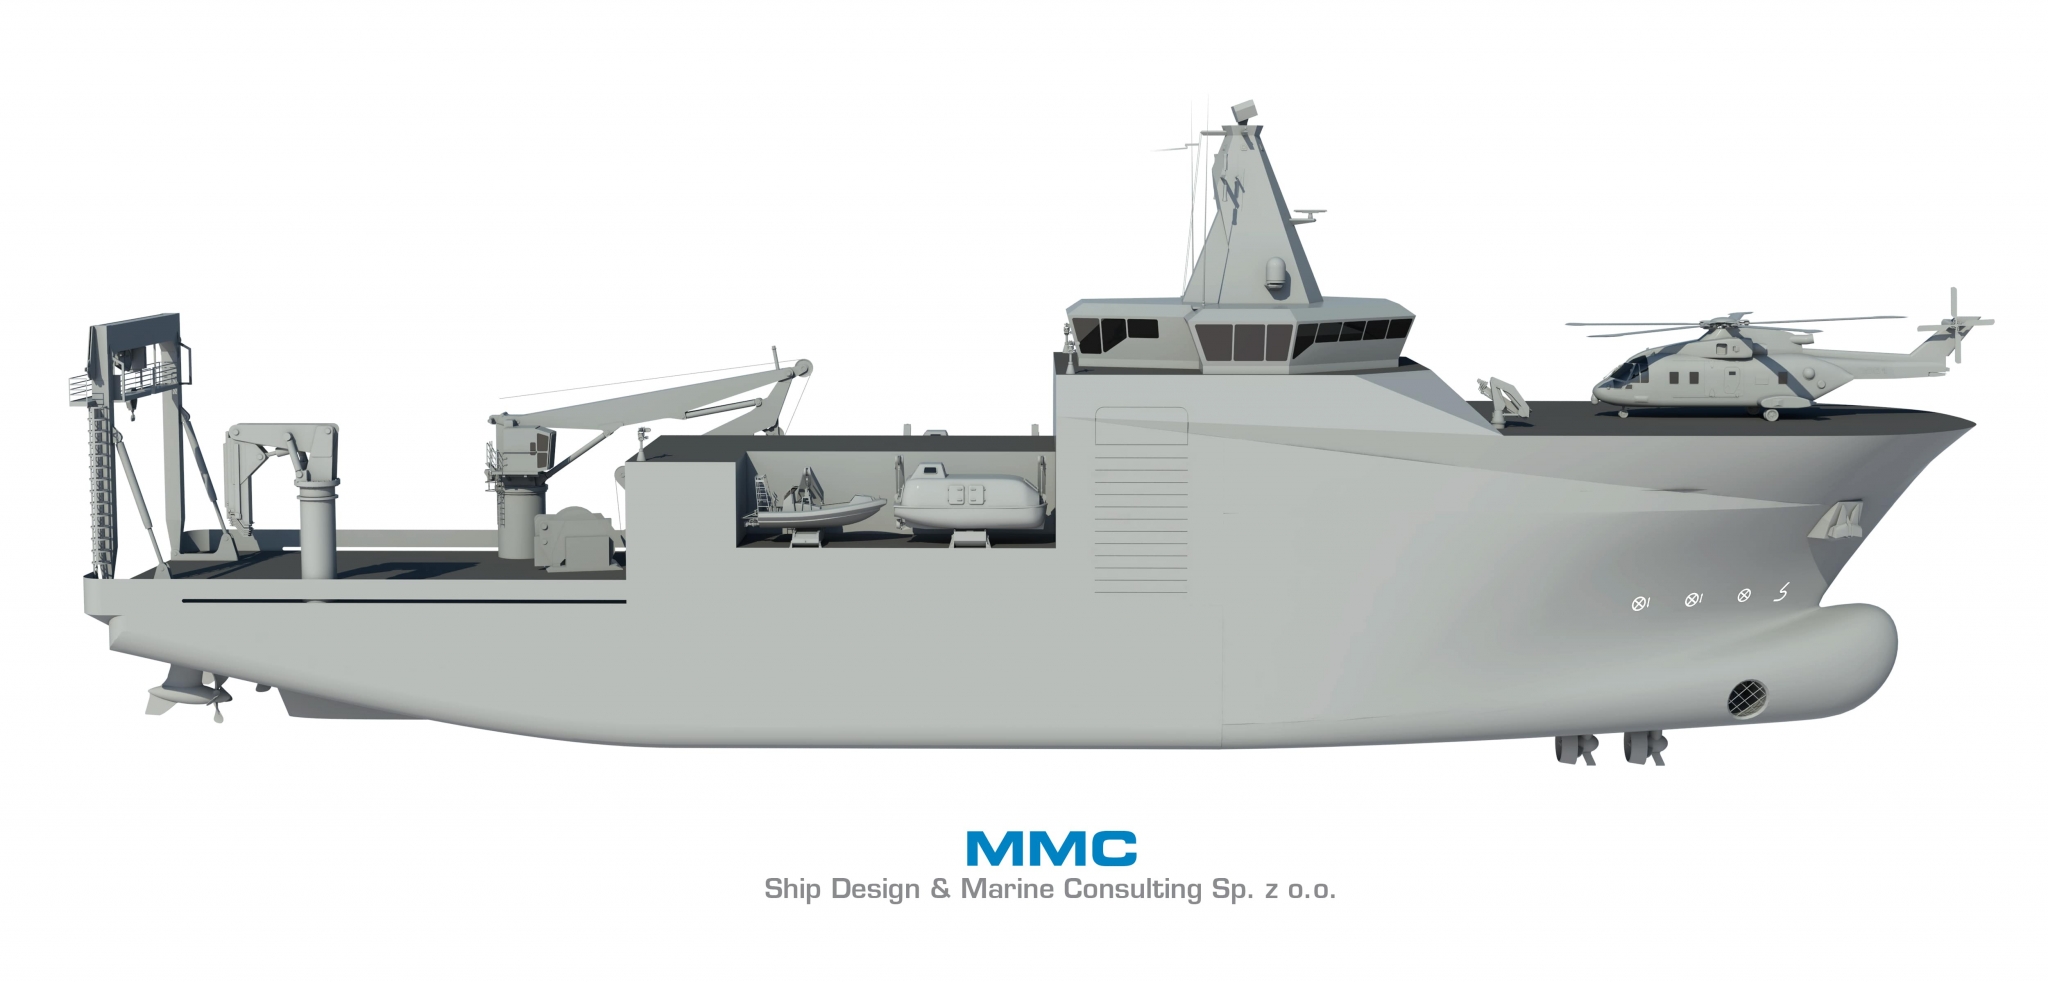 Contracts for New Ships for Polish Navy - MarinePoland.com